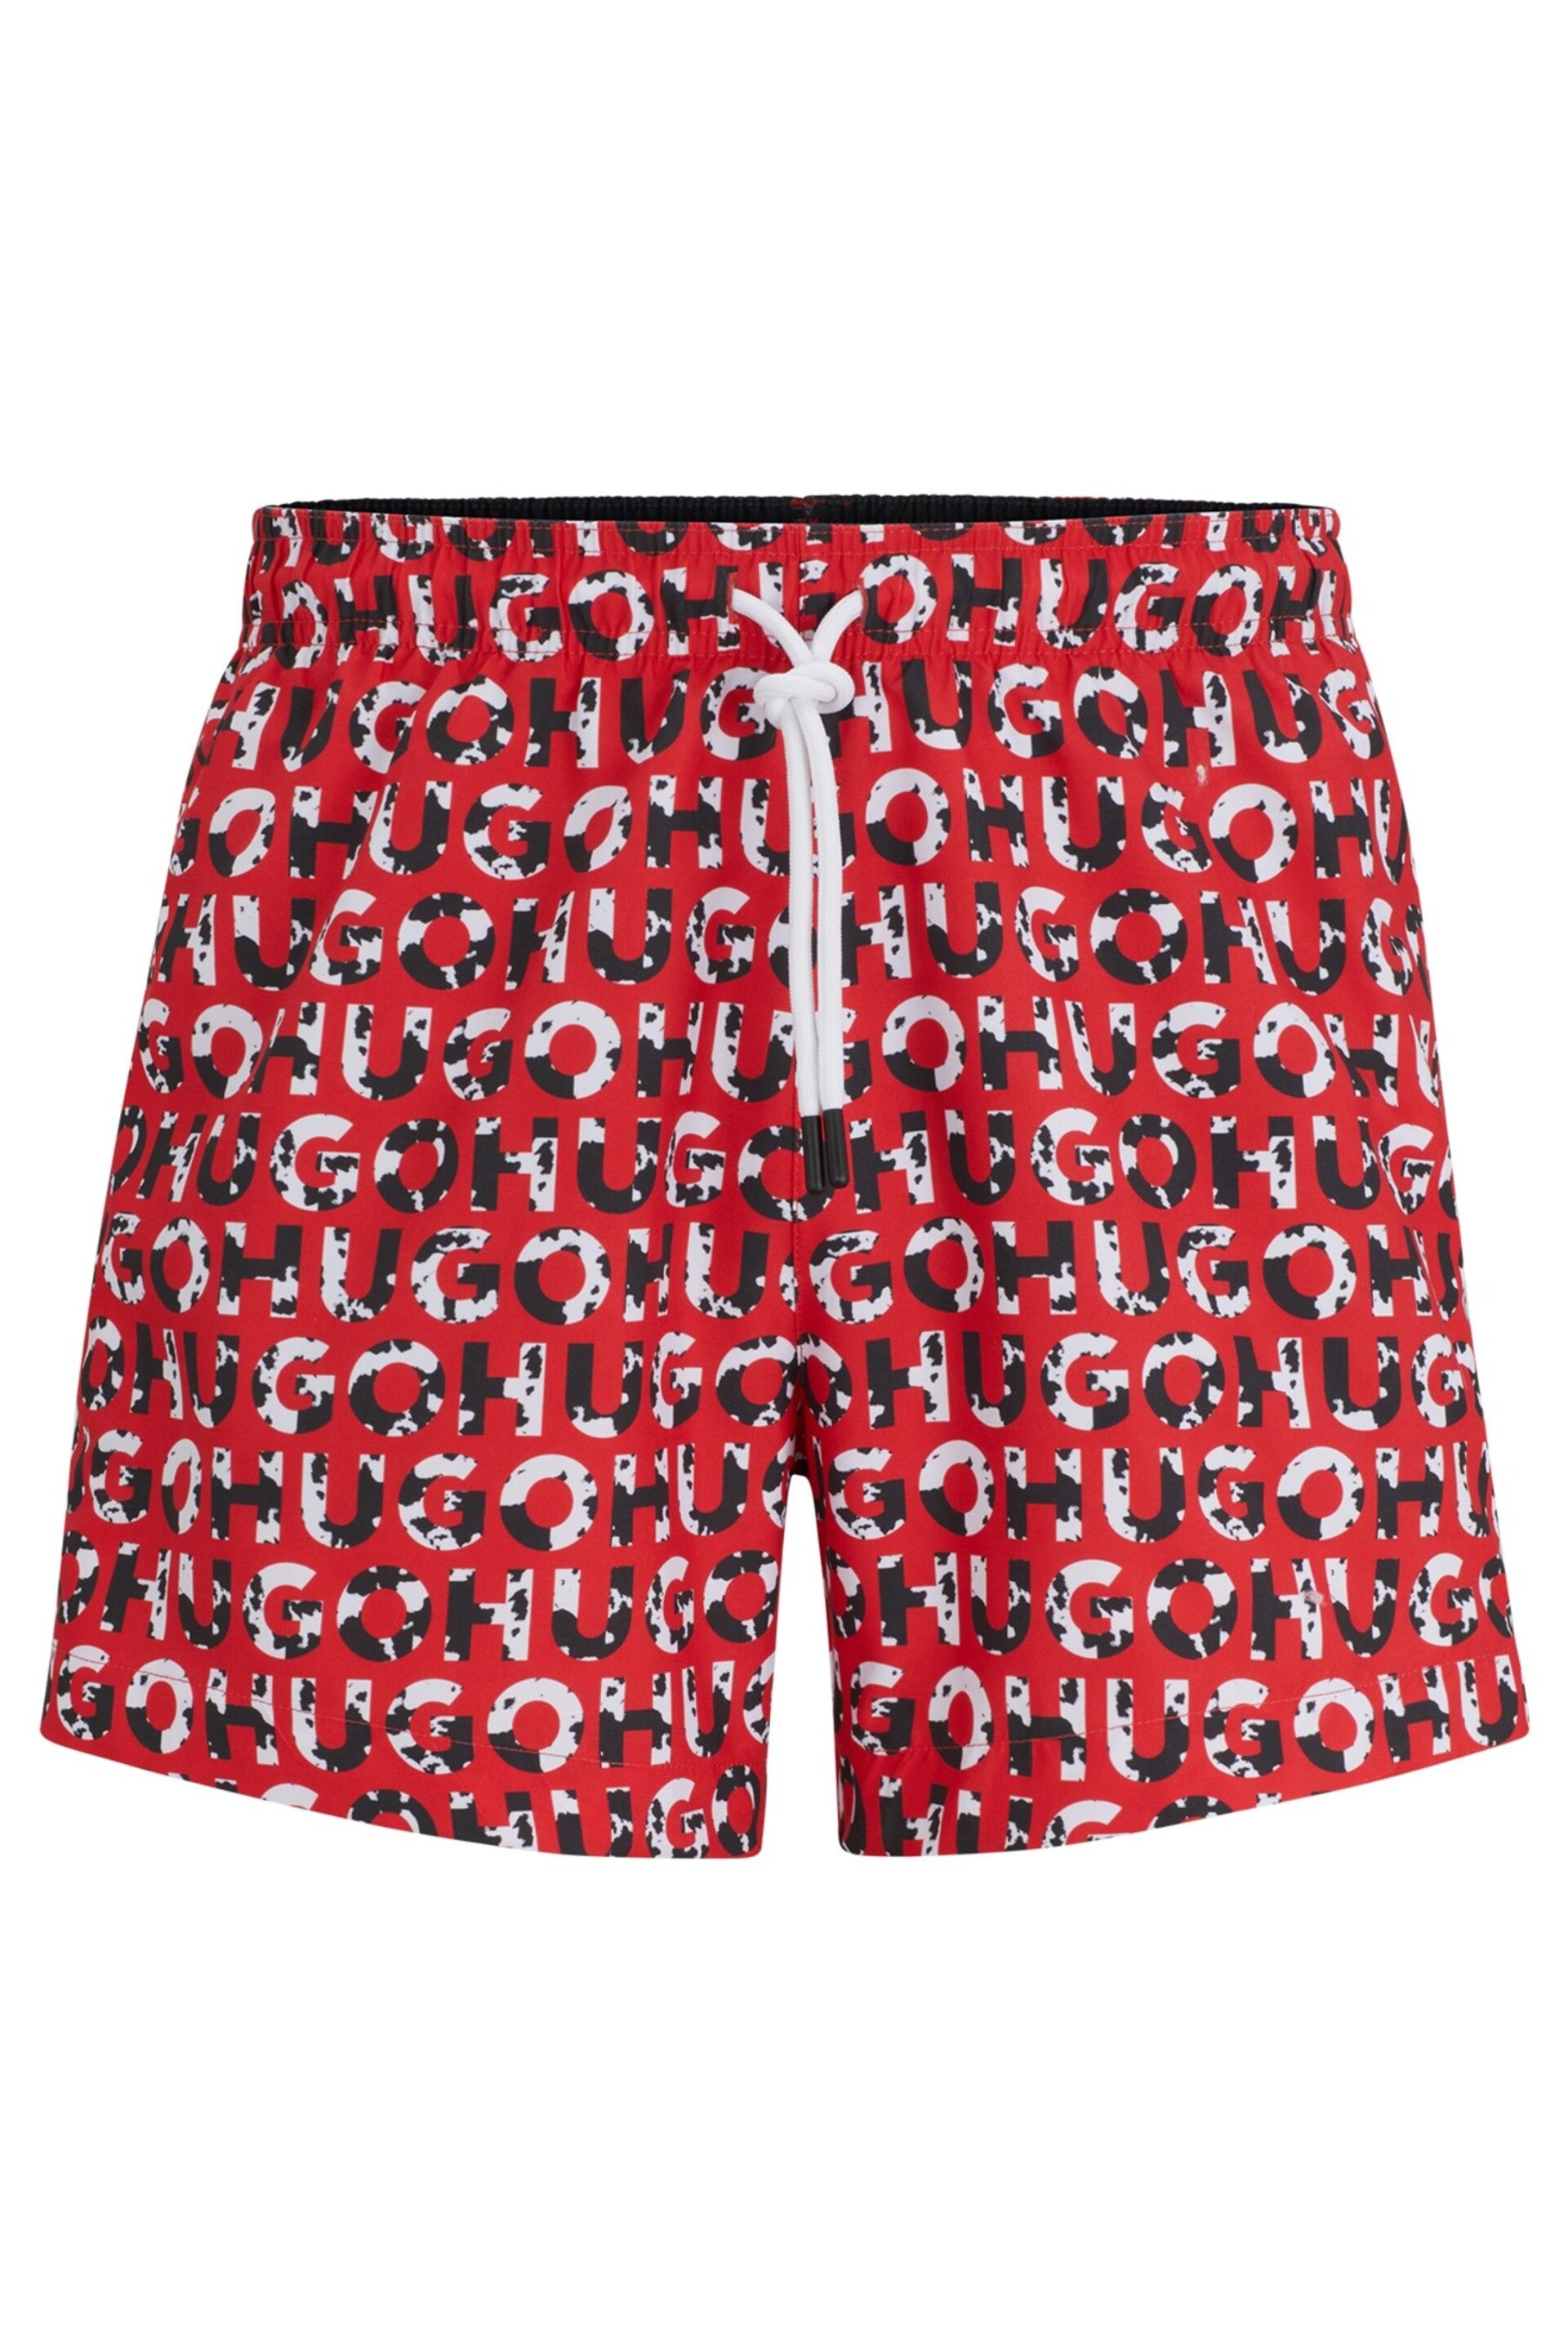 HUGO Recycled-Material Swim Shorts With Logo Print - Image 4 of 4